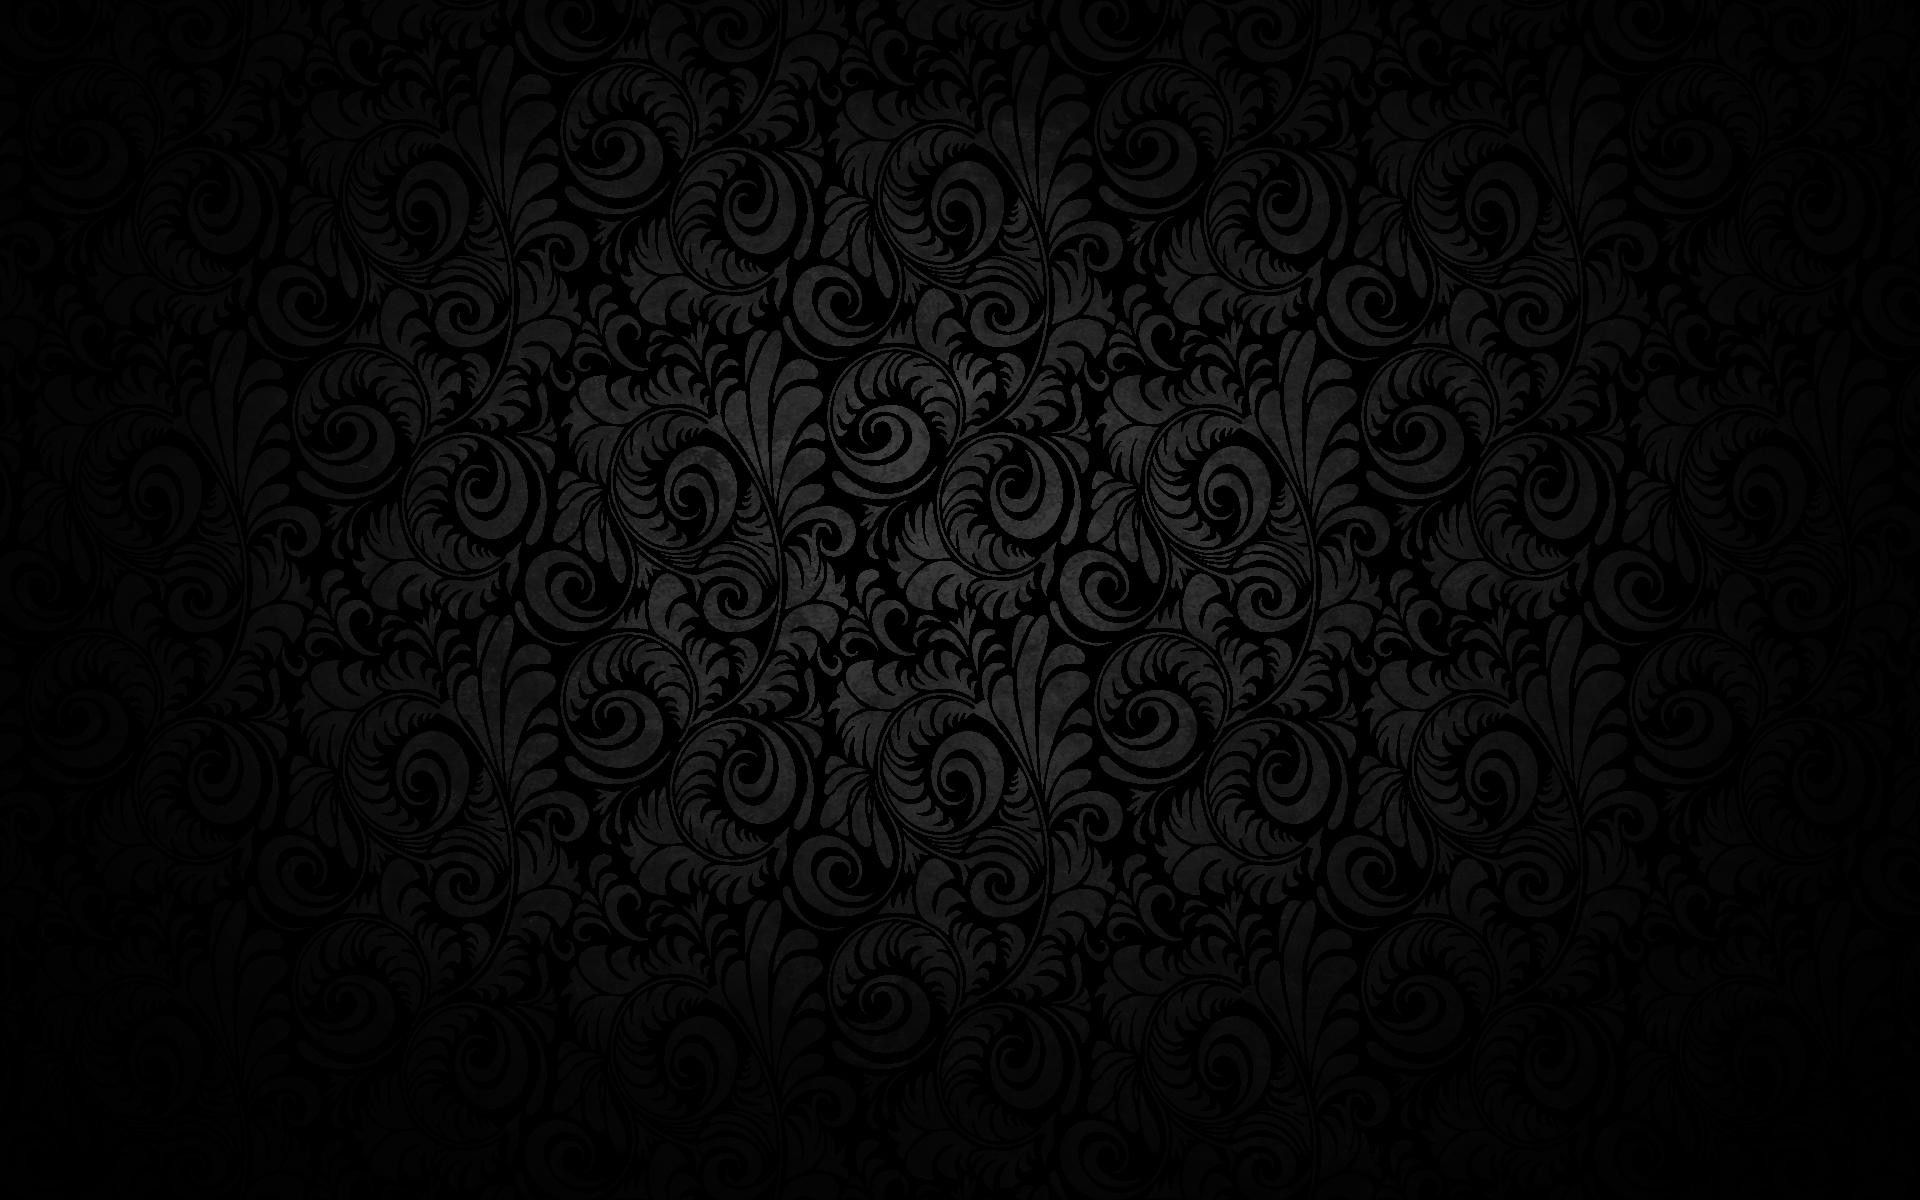 Mall Goth Wallpapers  Wallpaper Cave